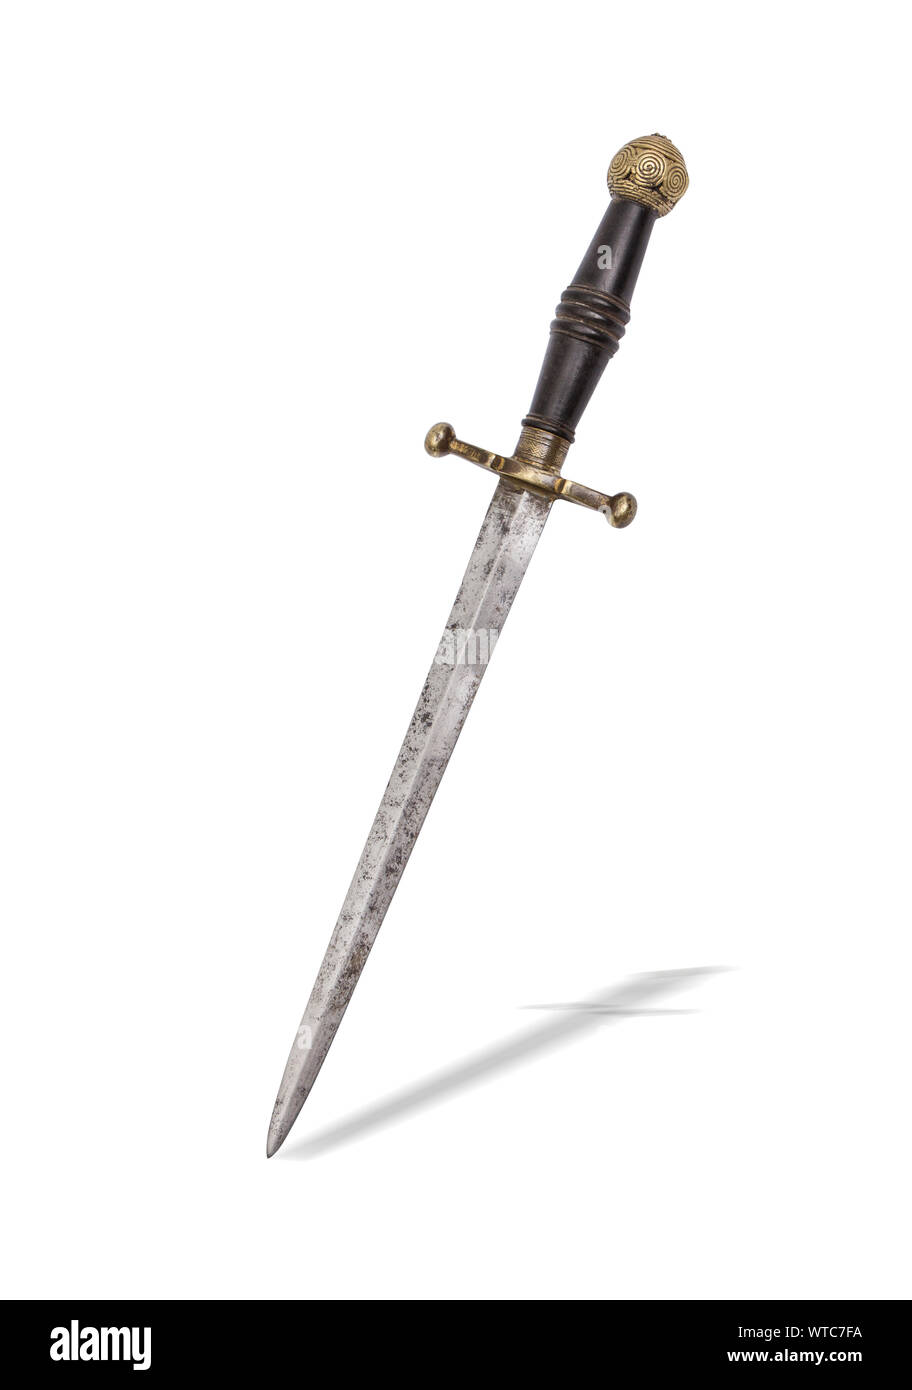 French dagger of the 18-19th century  European dagger ca. 1800 with straight double edged diamond-shaped blade, brass cross-guard, pommel and turned h Stock Photo